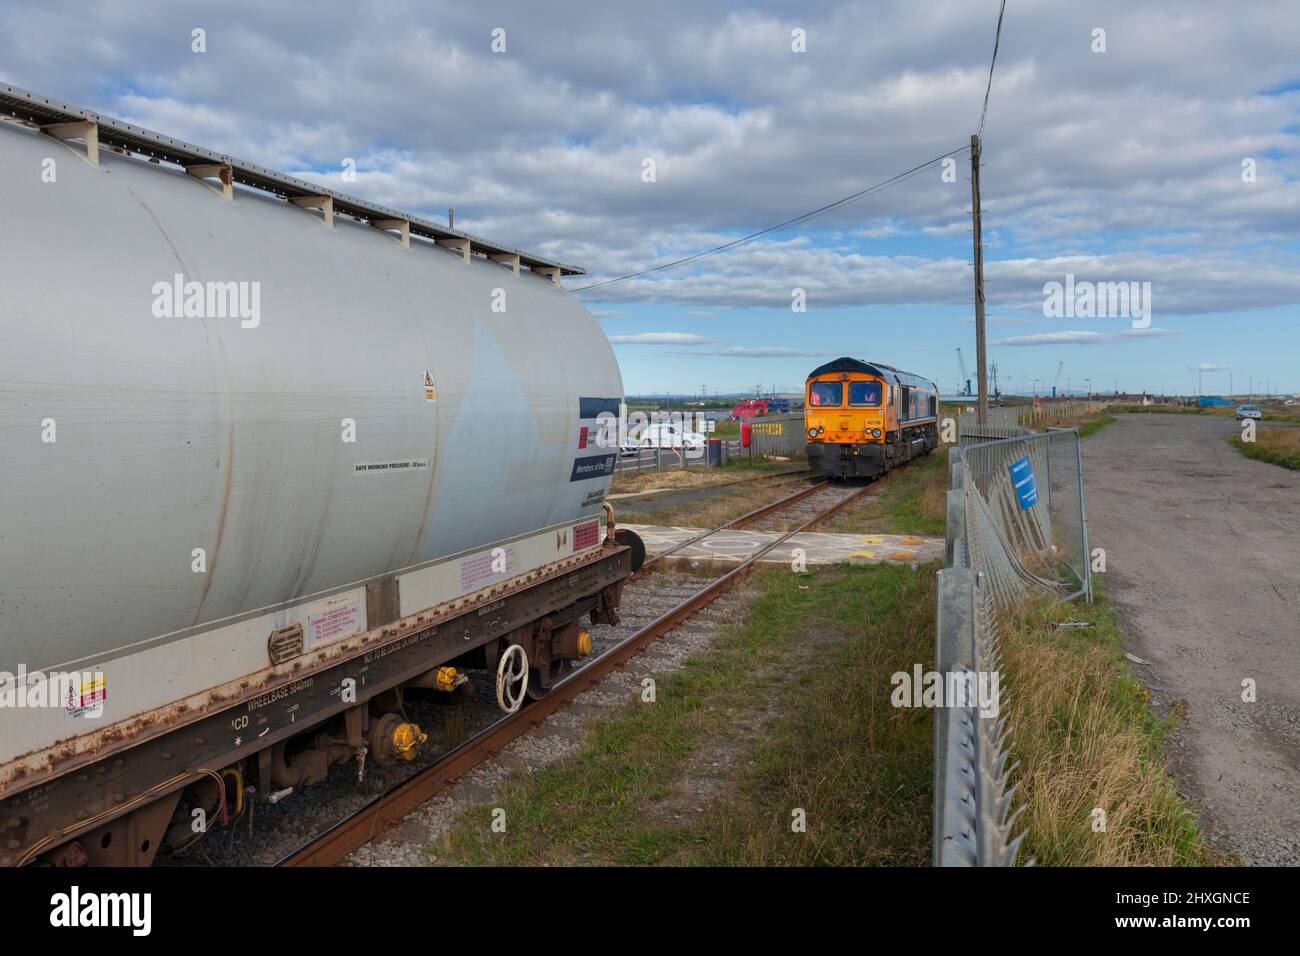 A GB Railfreigtht class 66 locomotive at North Blyth Alumina import terminal coupling up to a freight train carrying imported Alumina Stock Photo